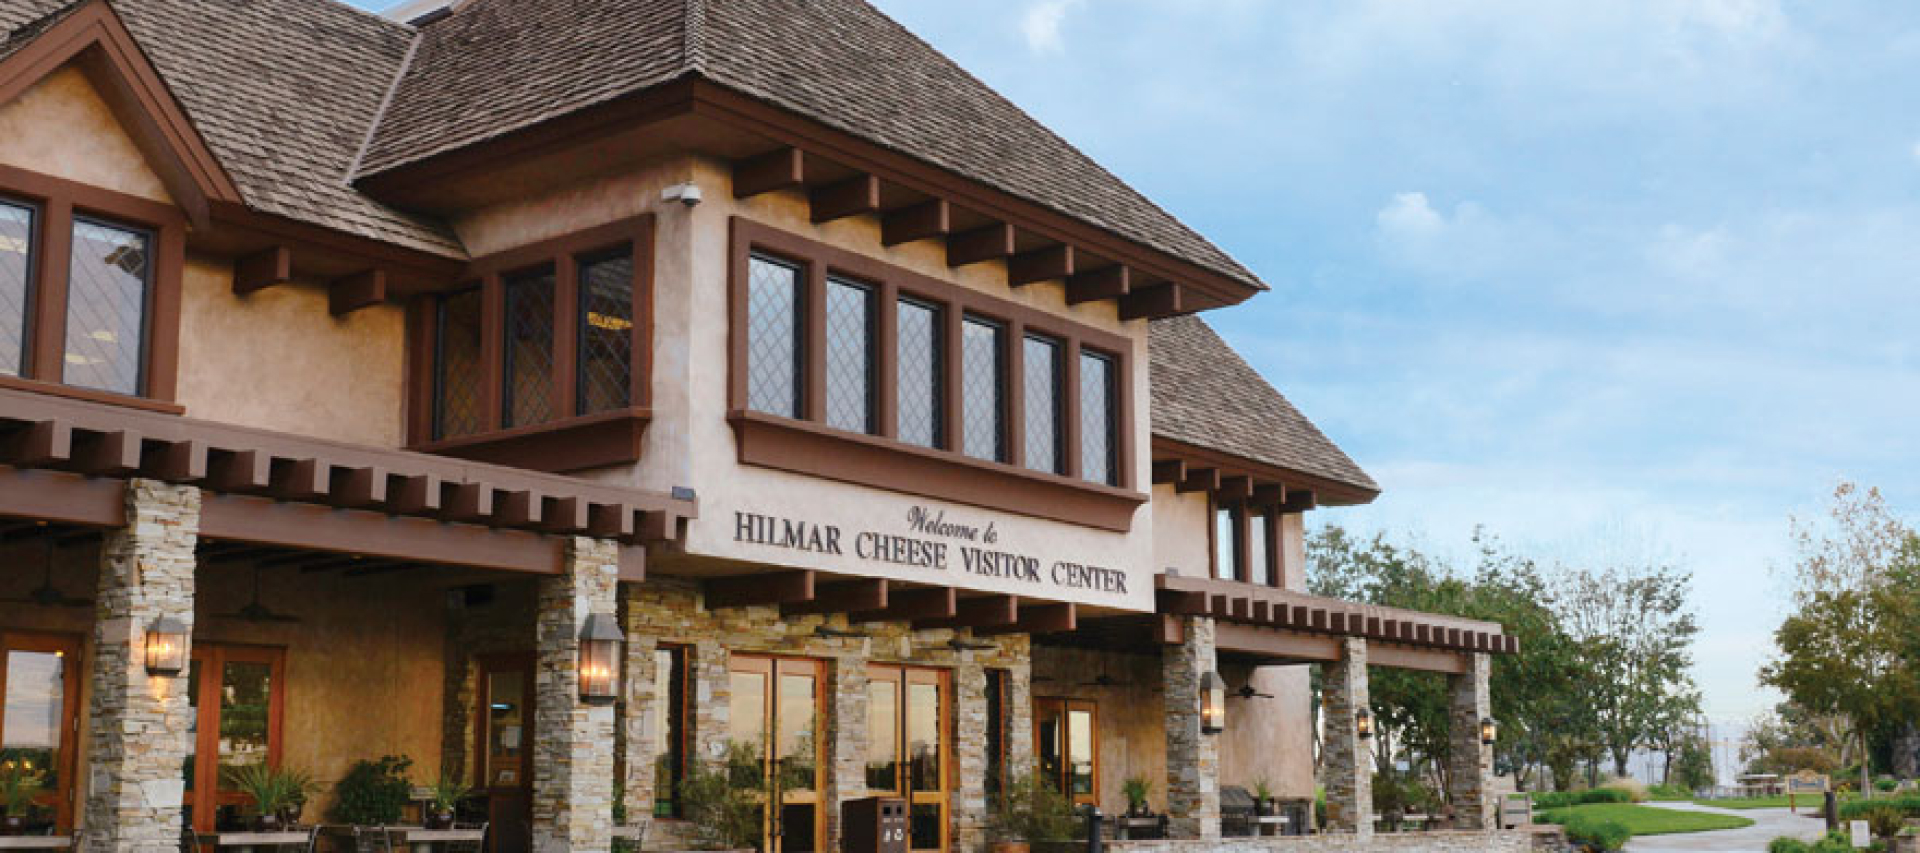 the front of the hilmar visitor center